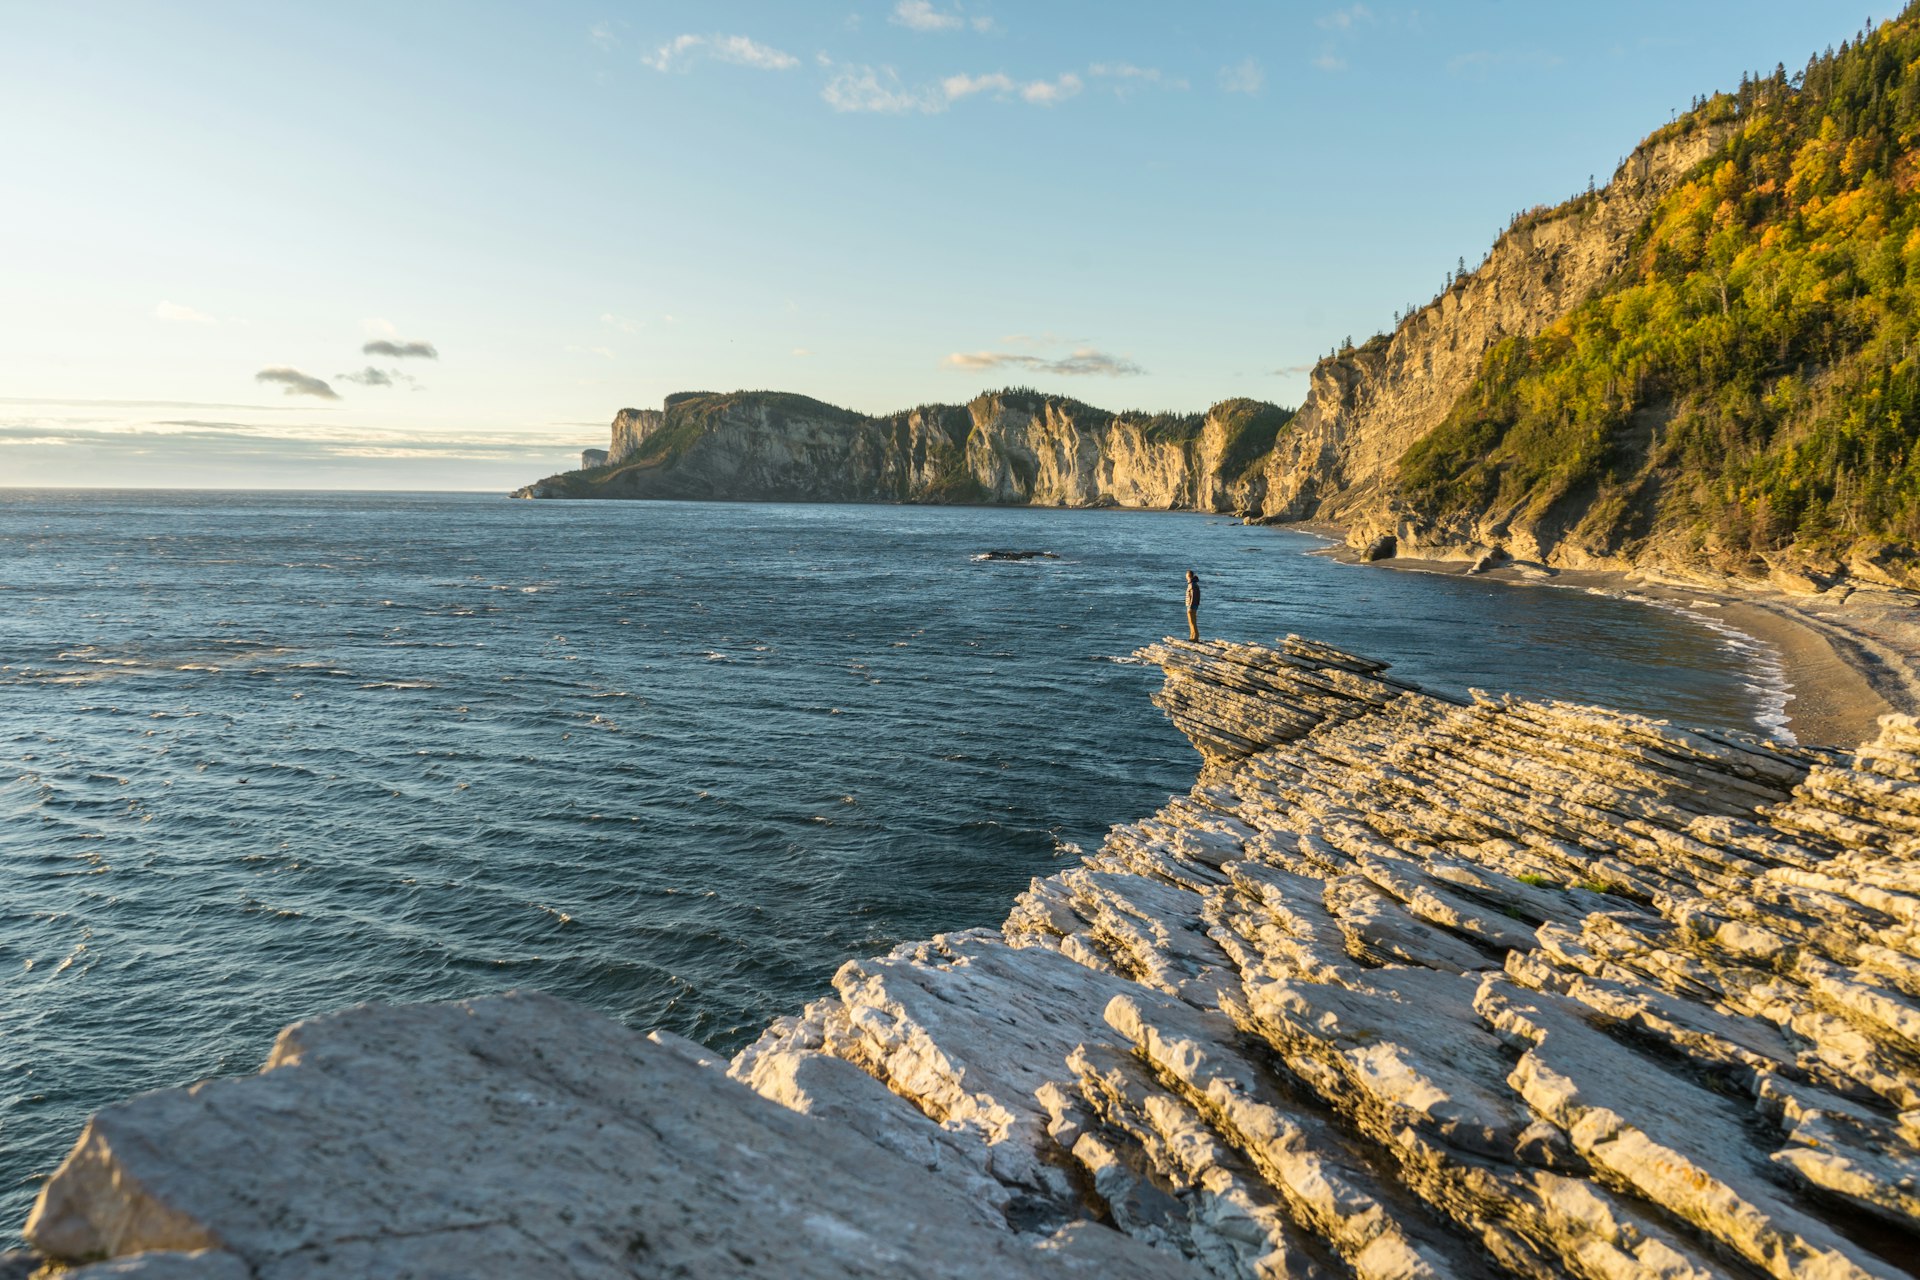 A person stands on the rocky shoreline backed by cliffs